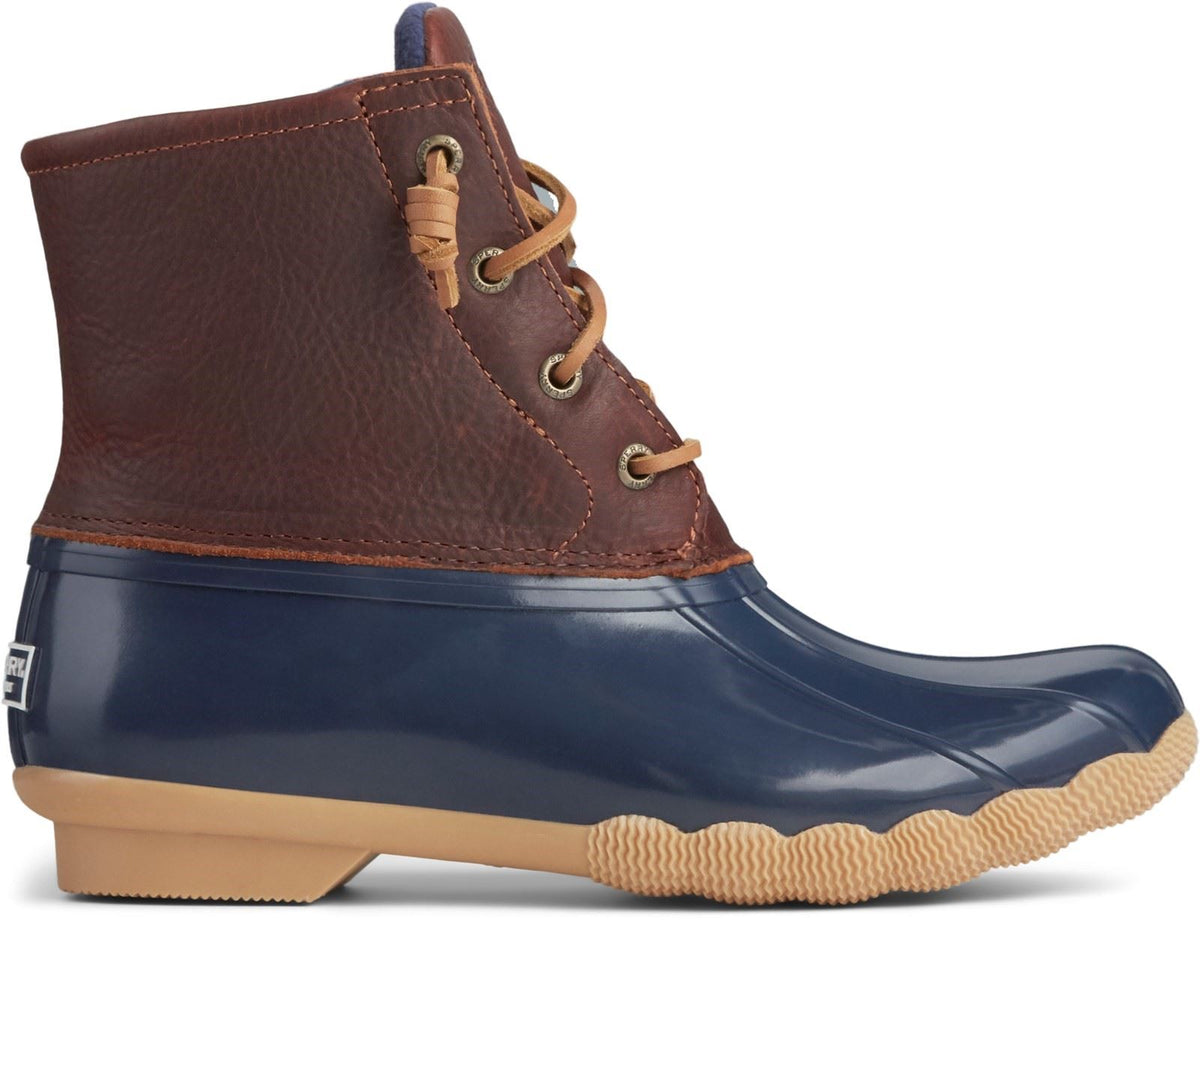 Sperry Saltwater Duck Weather Boots